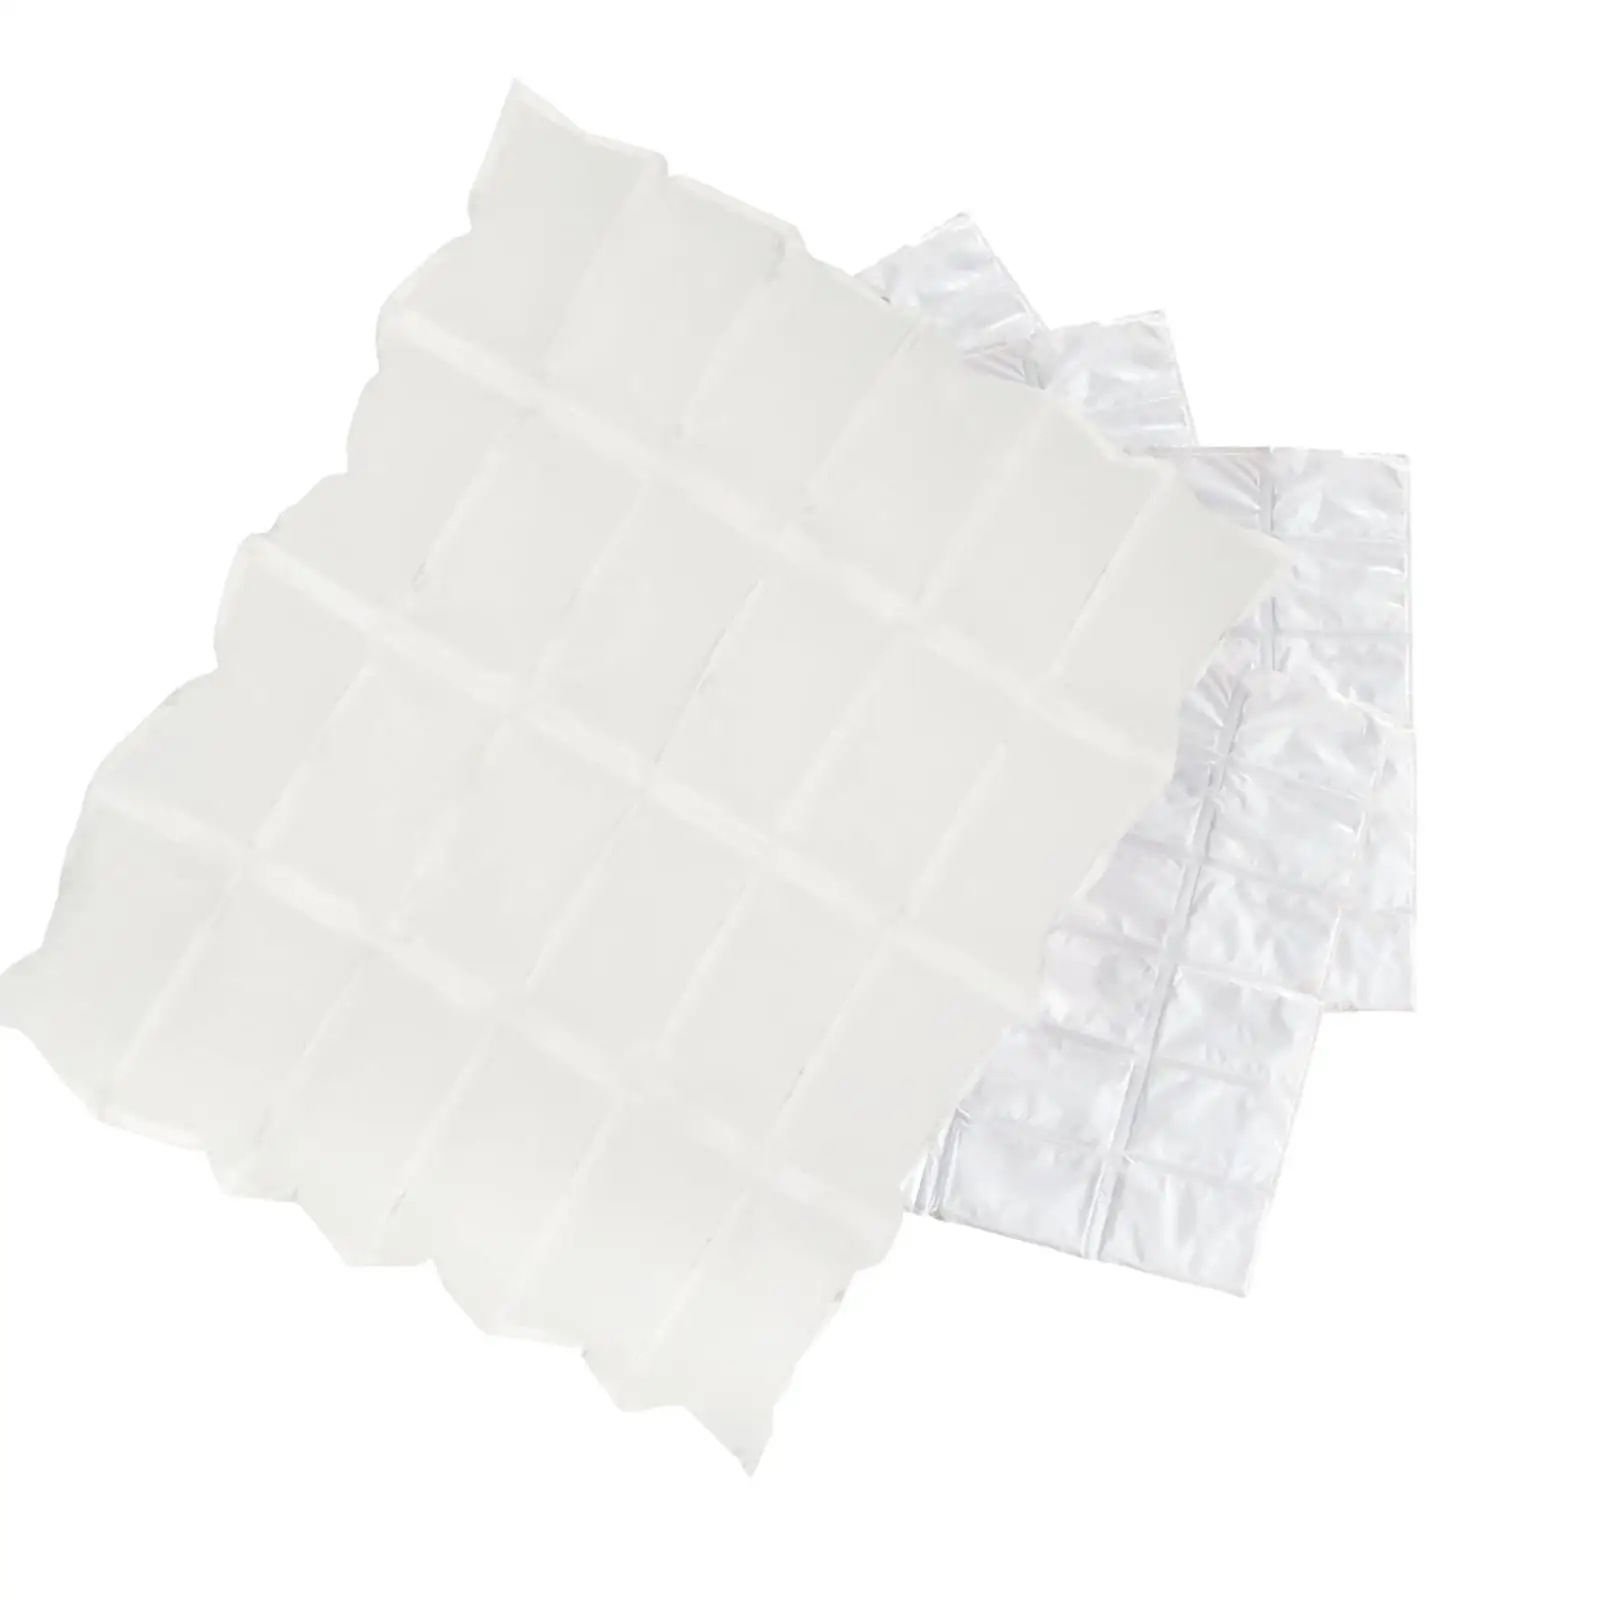 120 Pieces Ice Packs Cuttable Freezer Packs Cold Packs for Shipping Food Keep Food Fresh Lunch Bags Refrigerate Food